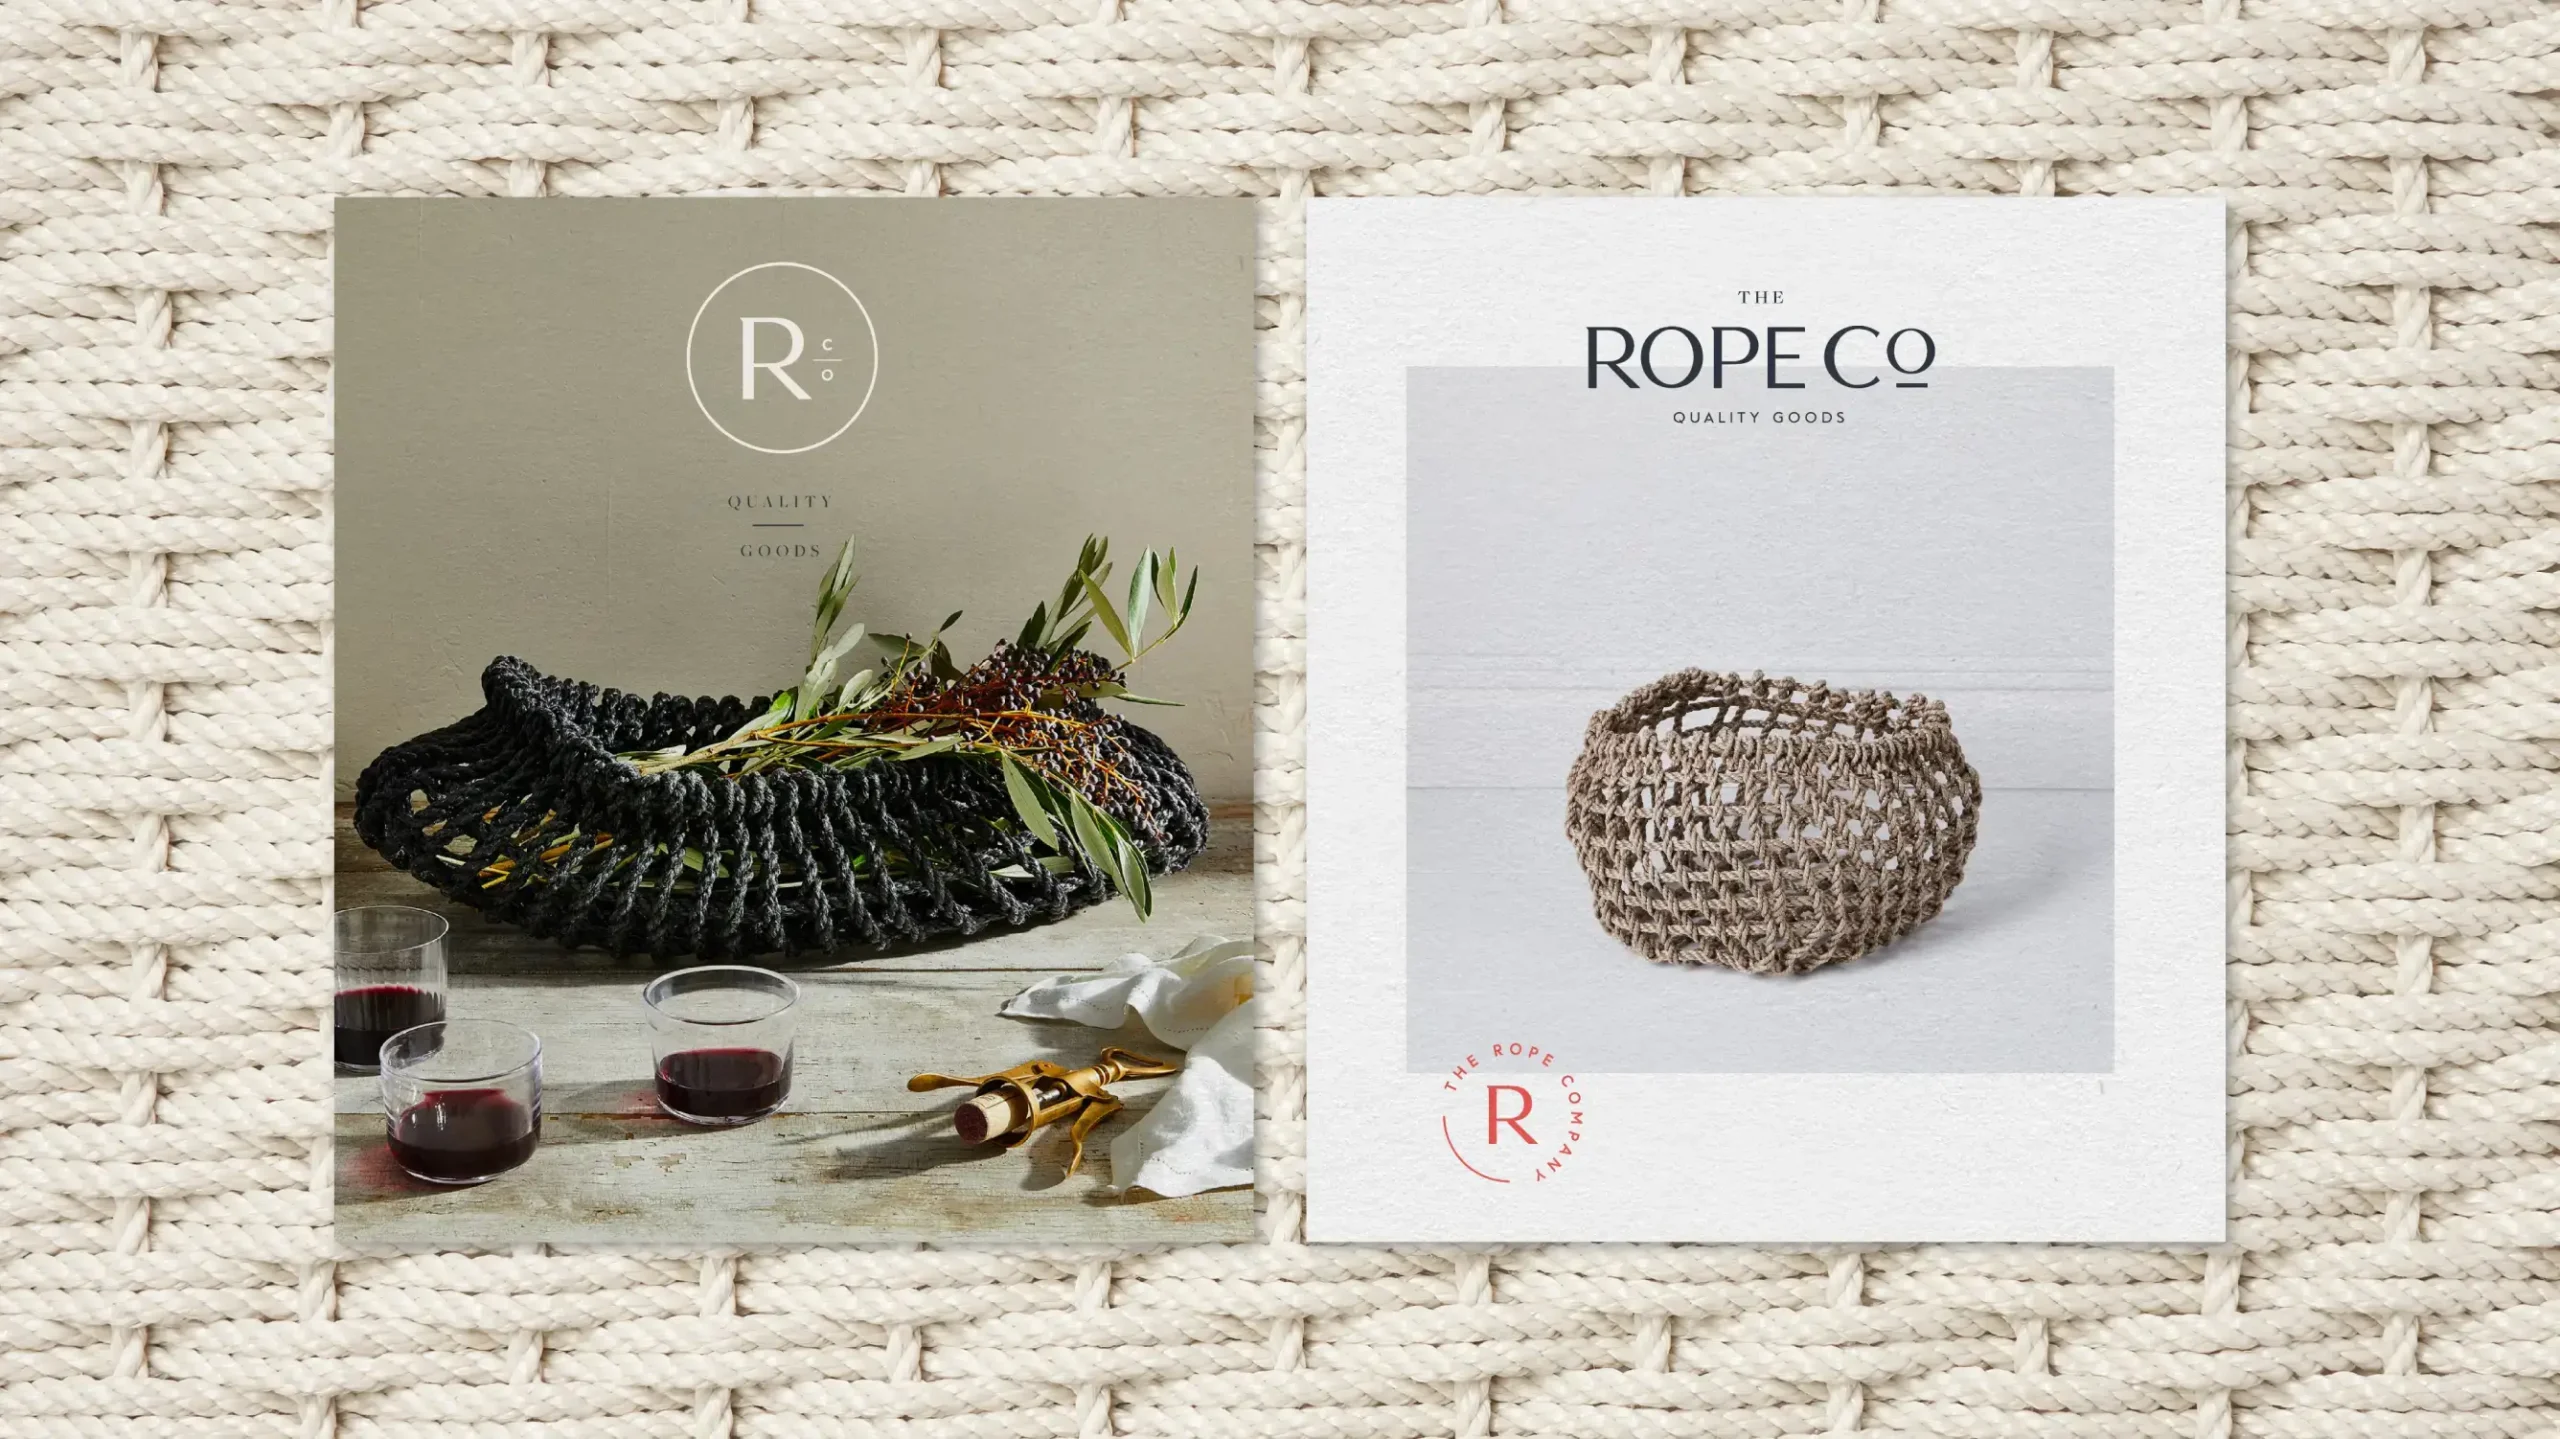 The Rope Co